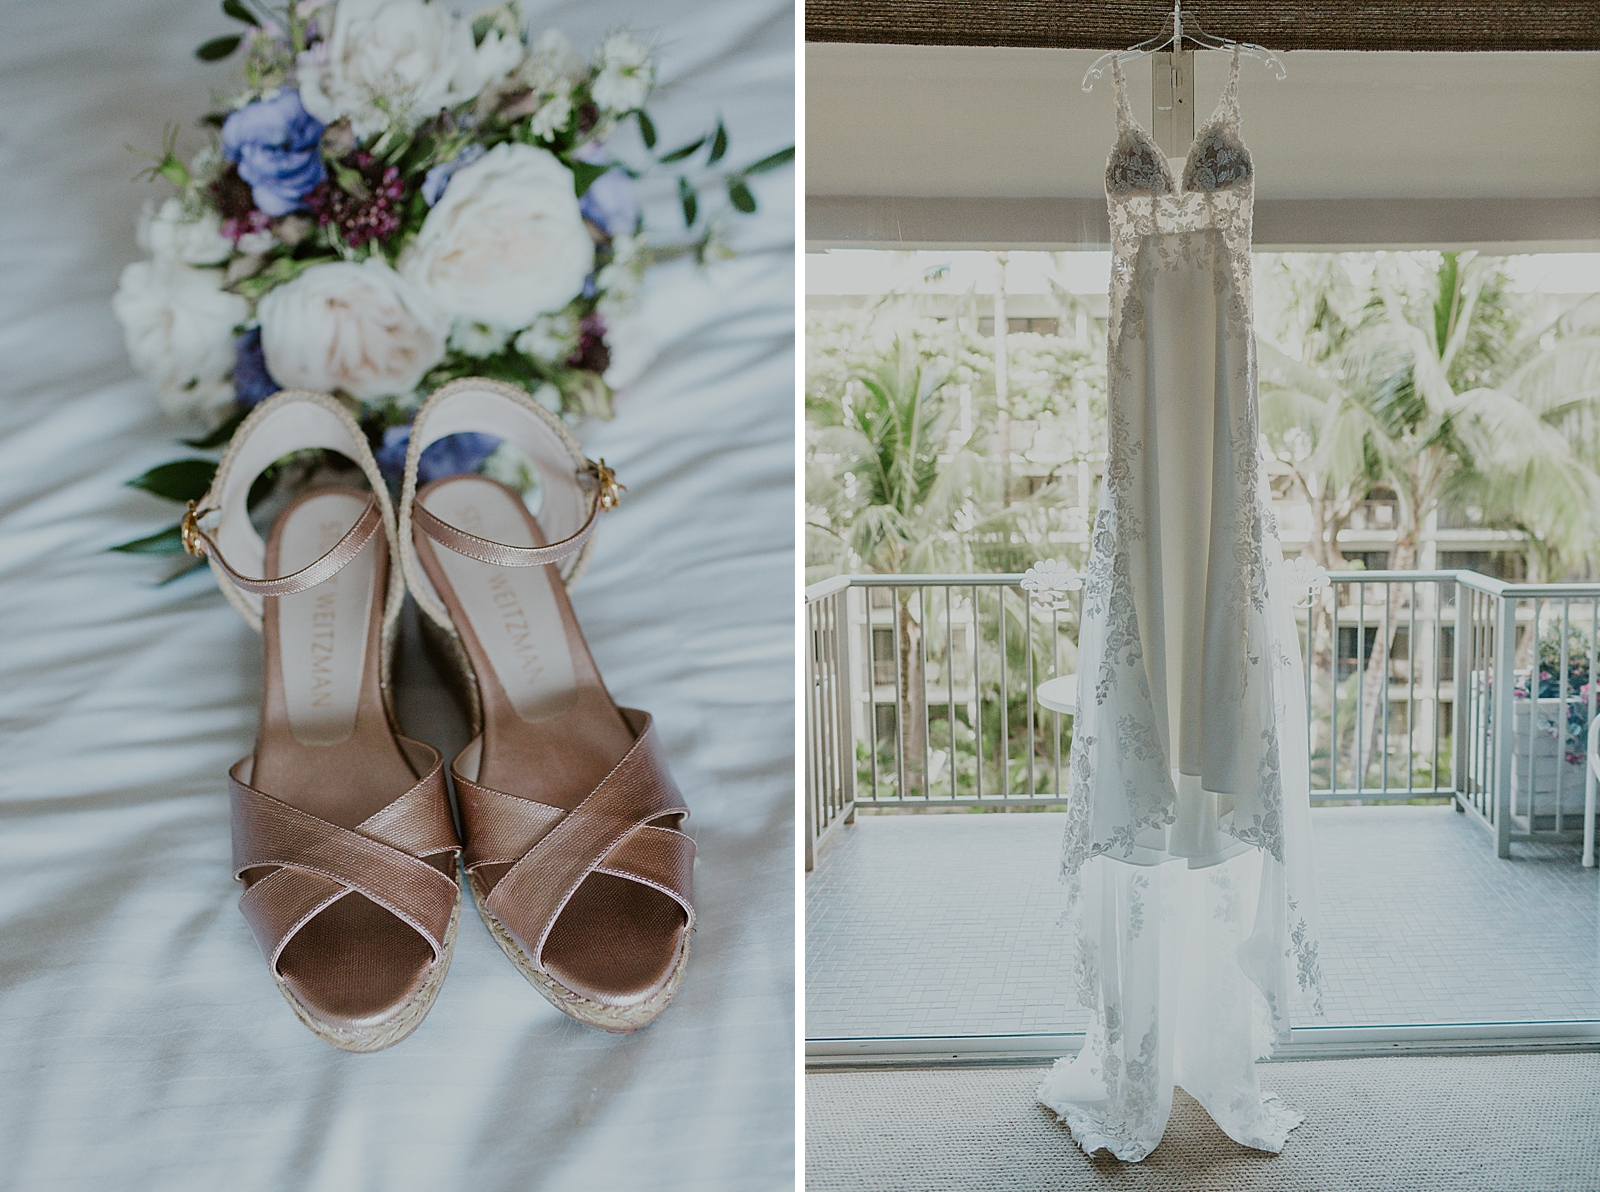 Detail shot of Bride's heels and wedding dress hanging by the window